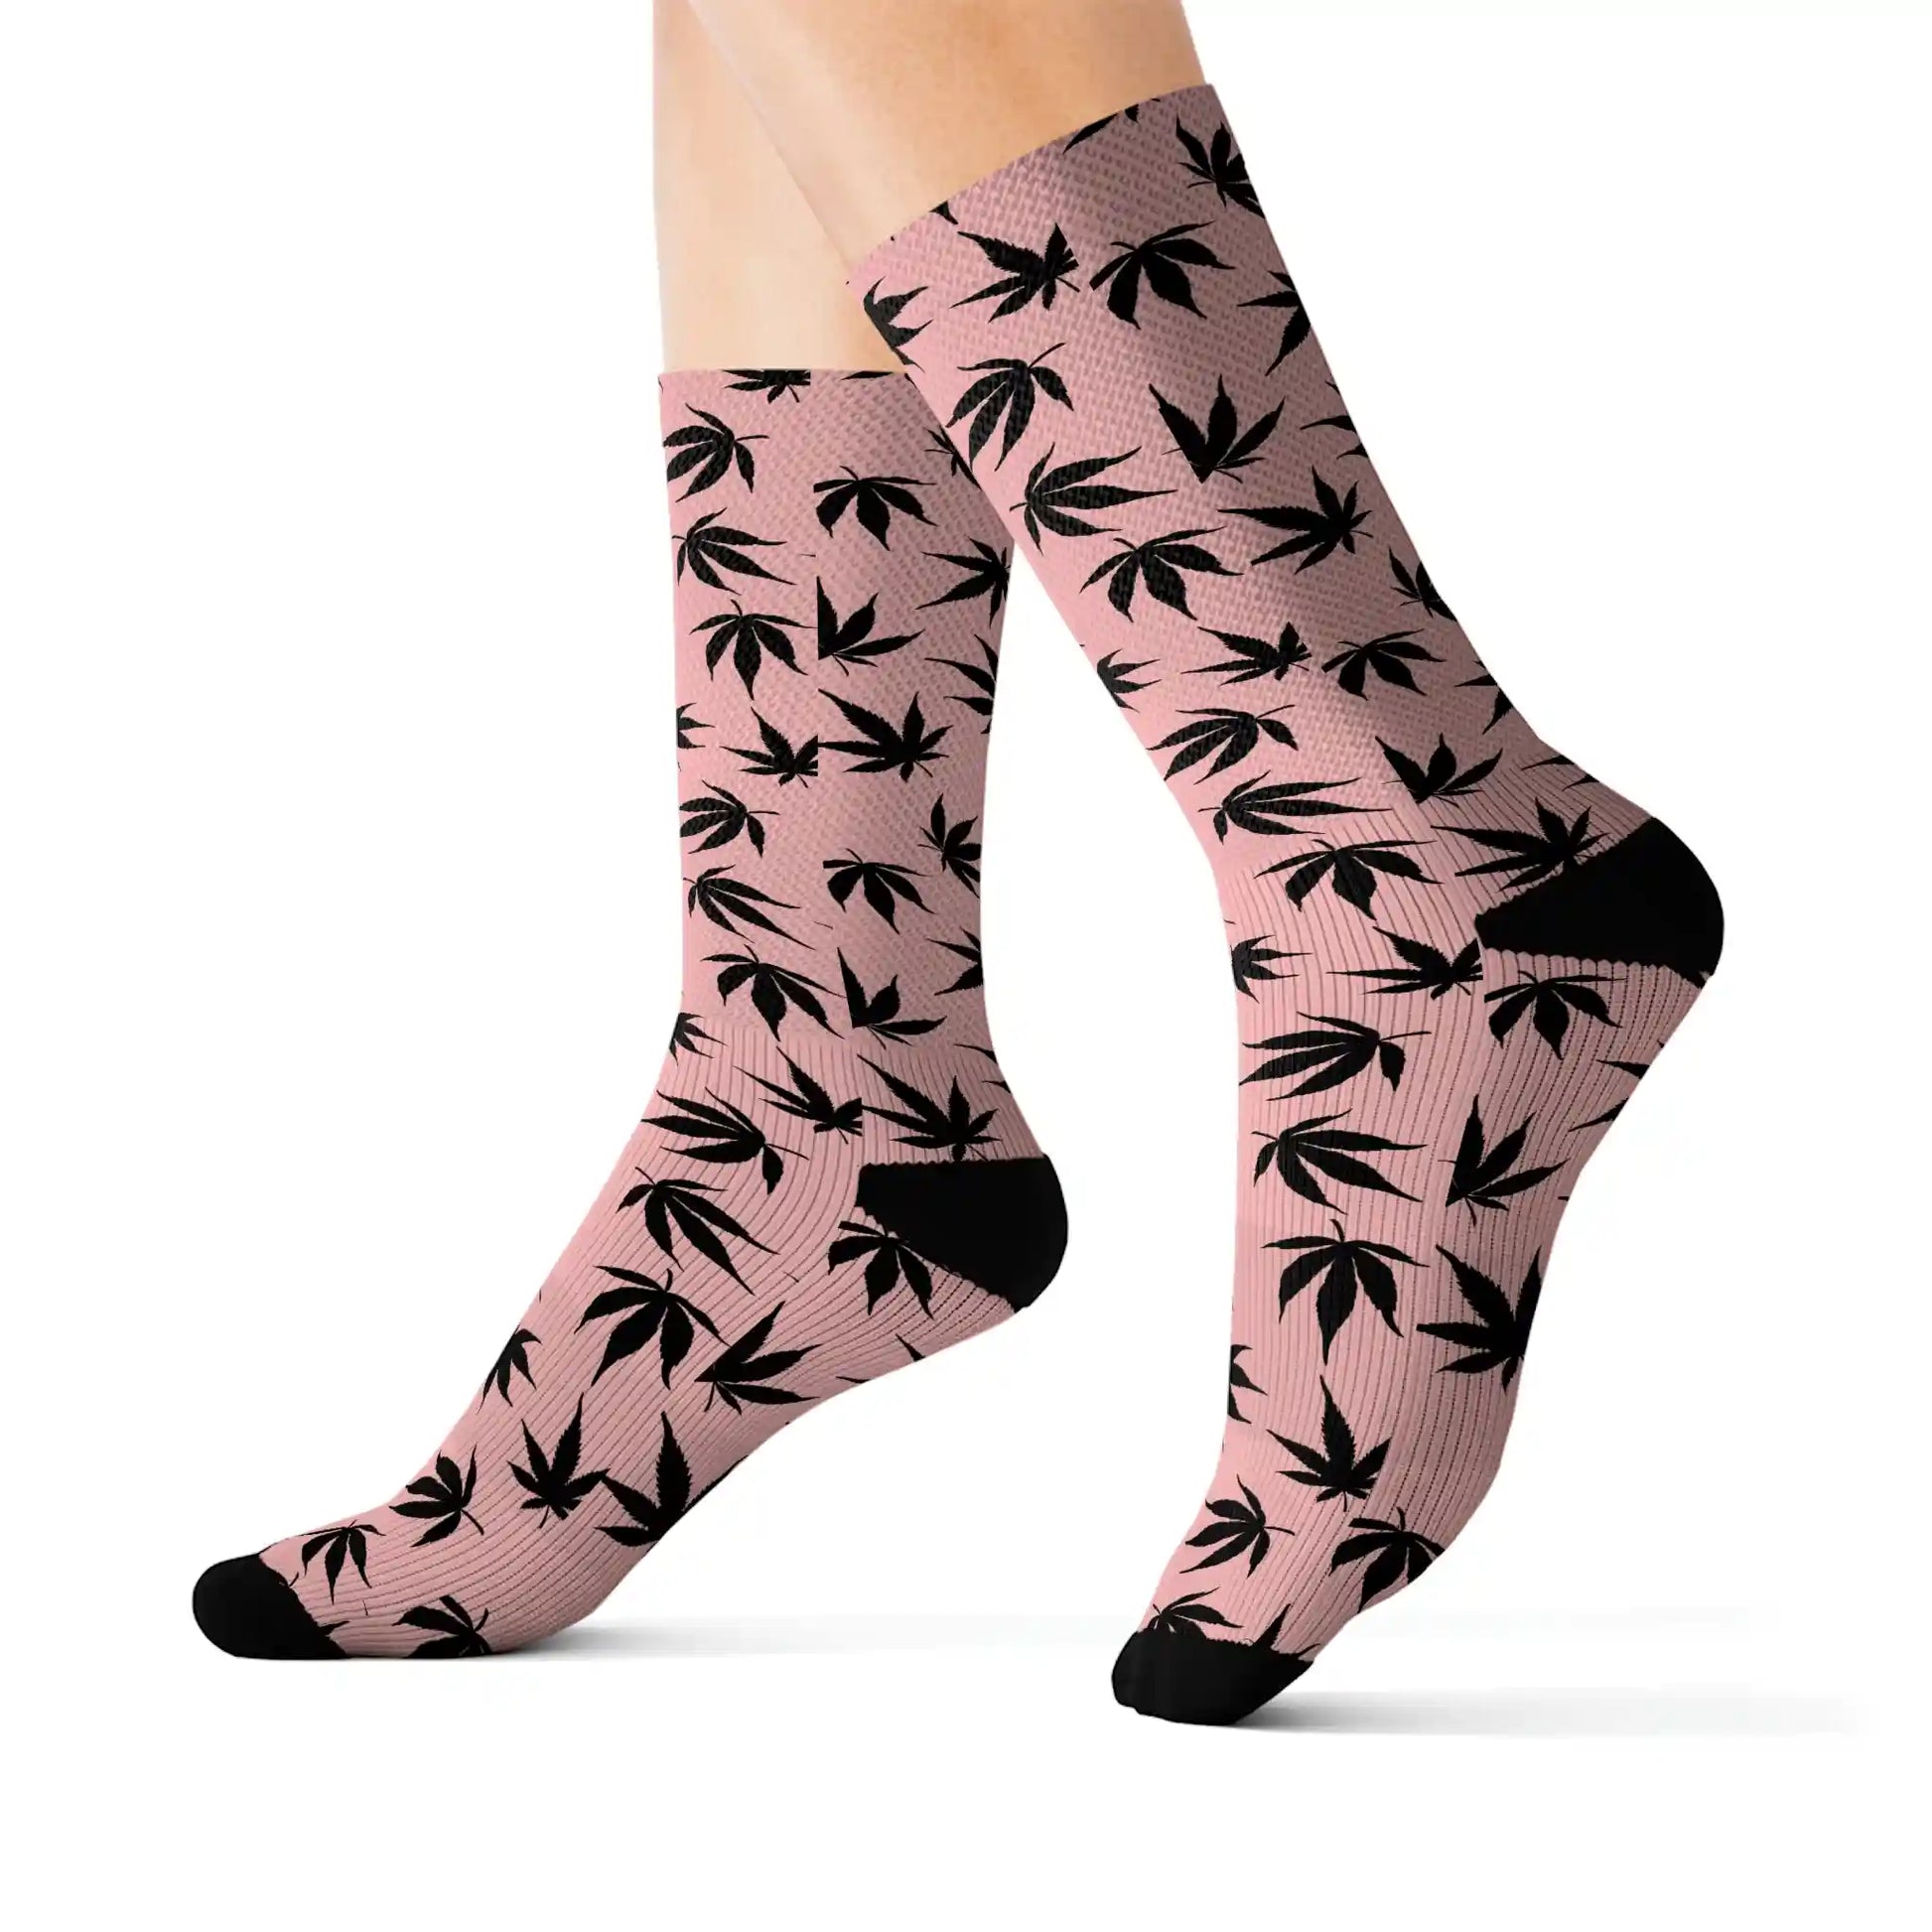 a close up of a stylish pair of pink and black marijuana socks with black cannabis leaves all over